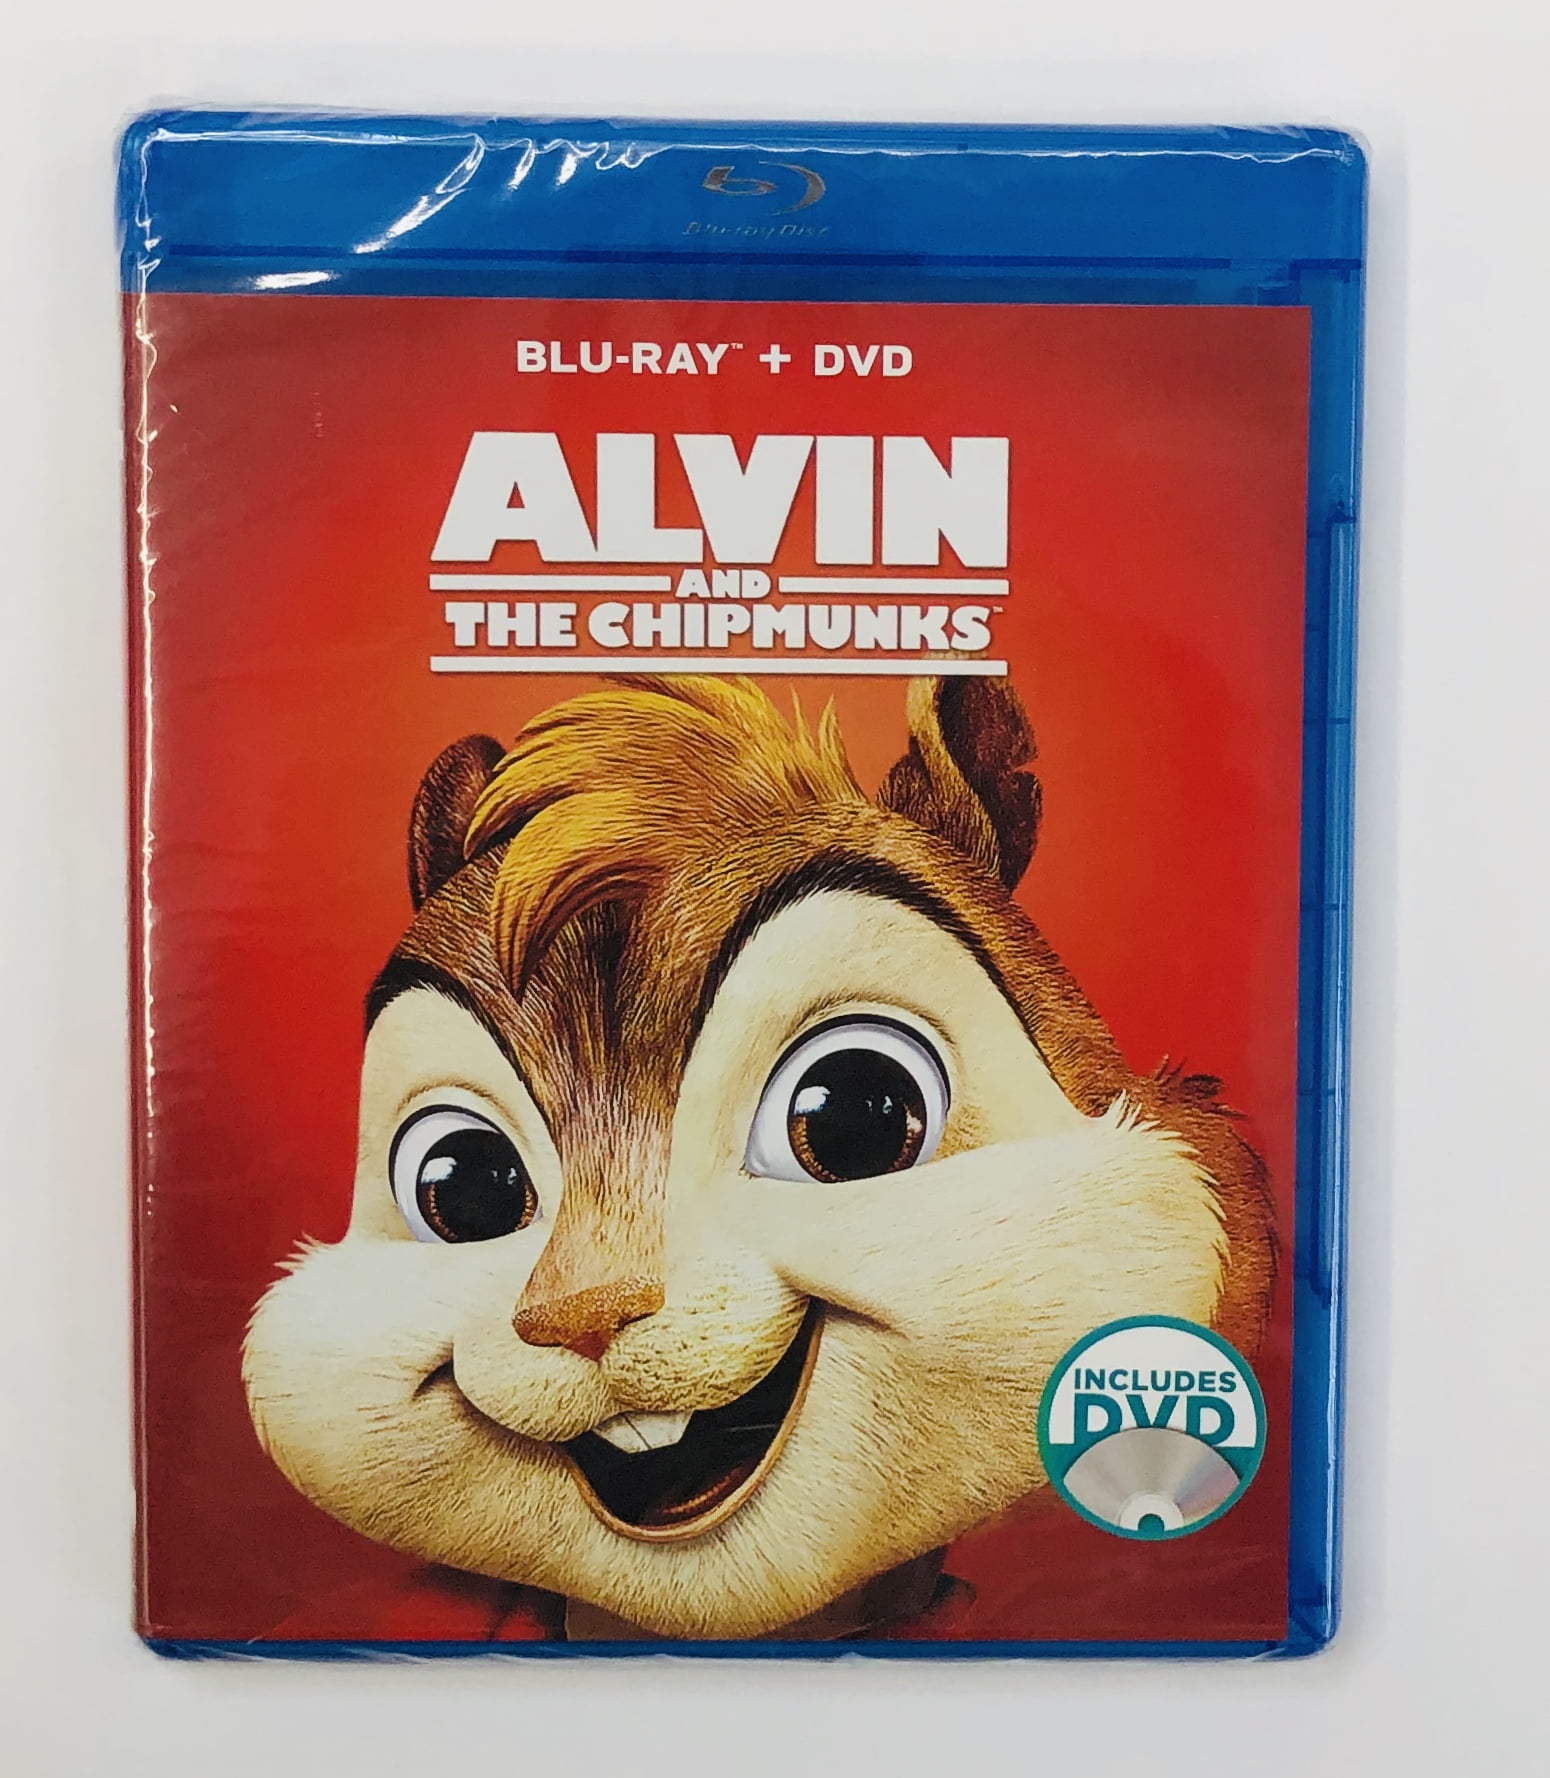 Alvin and the Chipmunks IP for sale